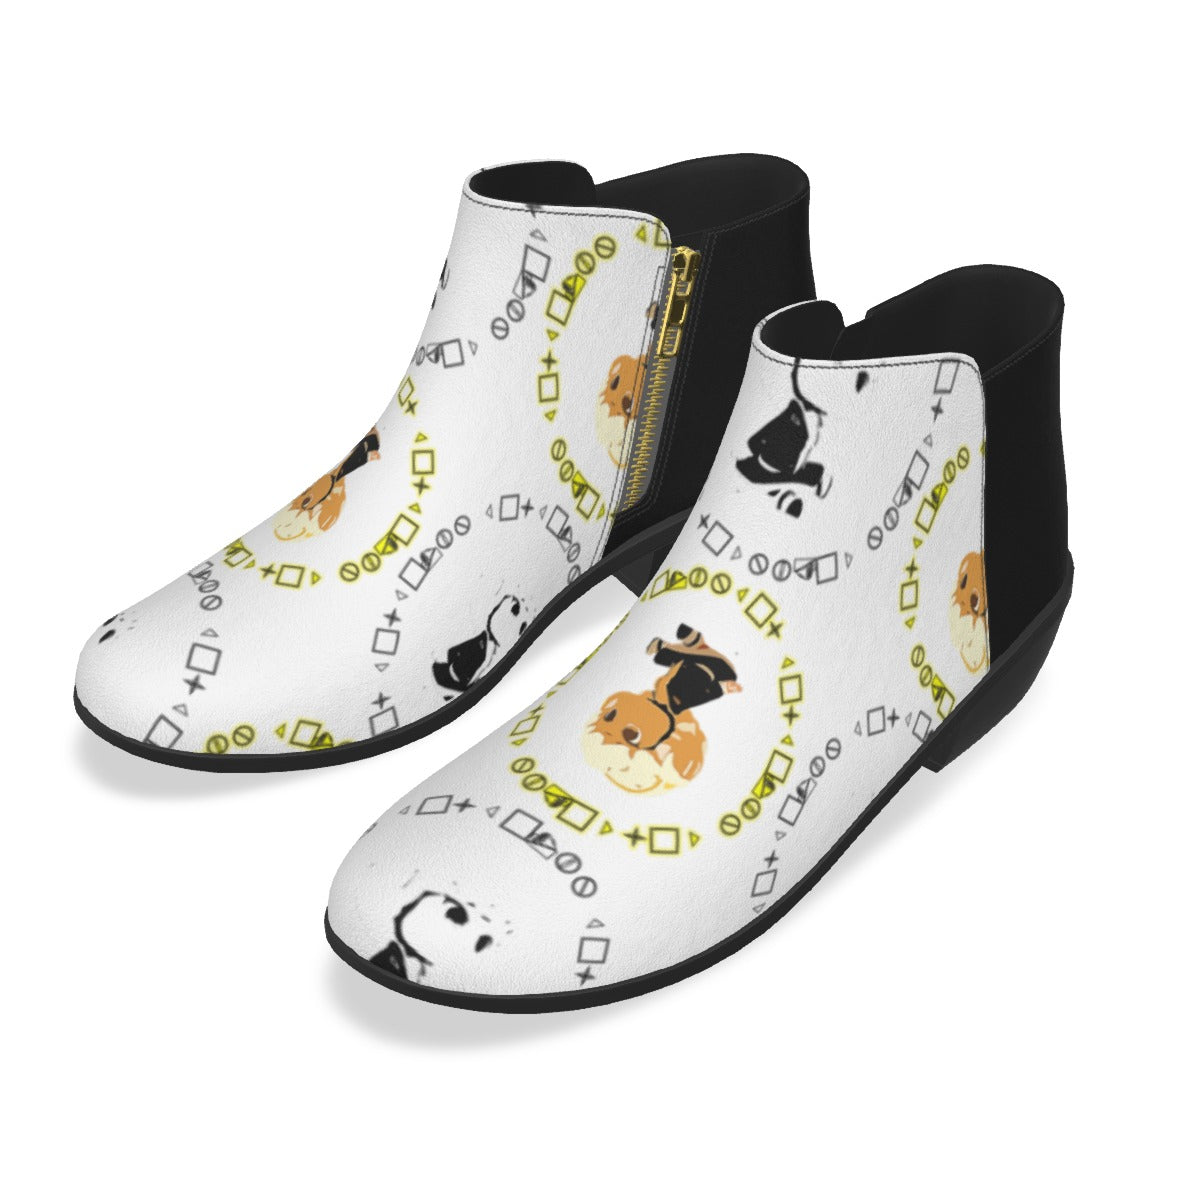 Branded Pattern Men's Fashion Boots